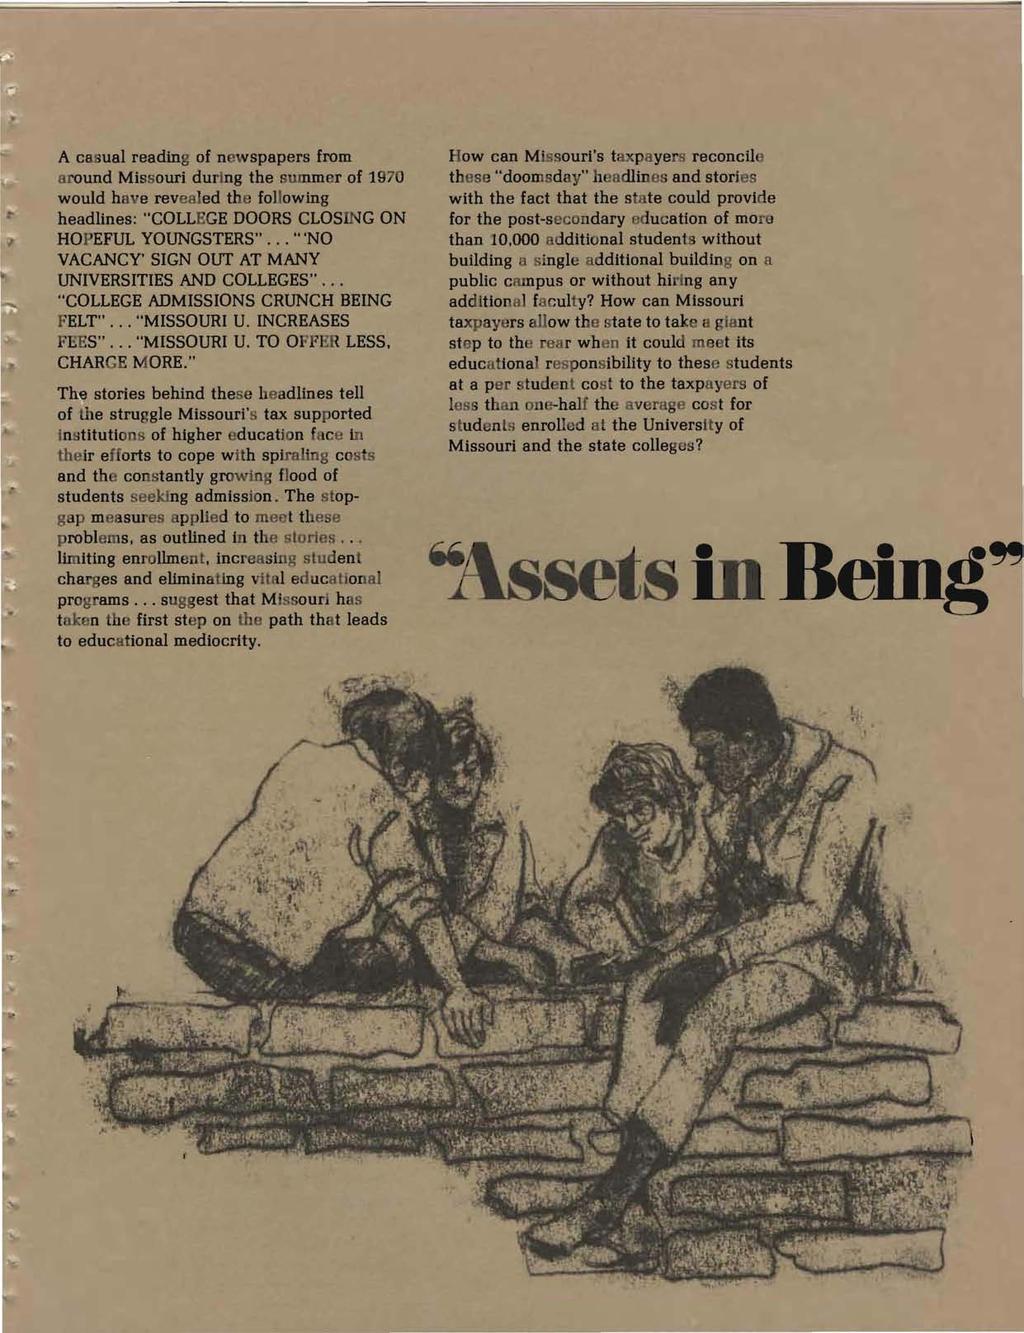 A casual reading of newspapers from ilround Missouri during the summer of 1970 would have revealed the following headlines: "COLLEGE DOORS CLOSING ON HOPEFUL YOUNGSTERS".